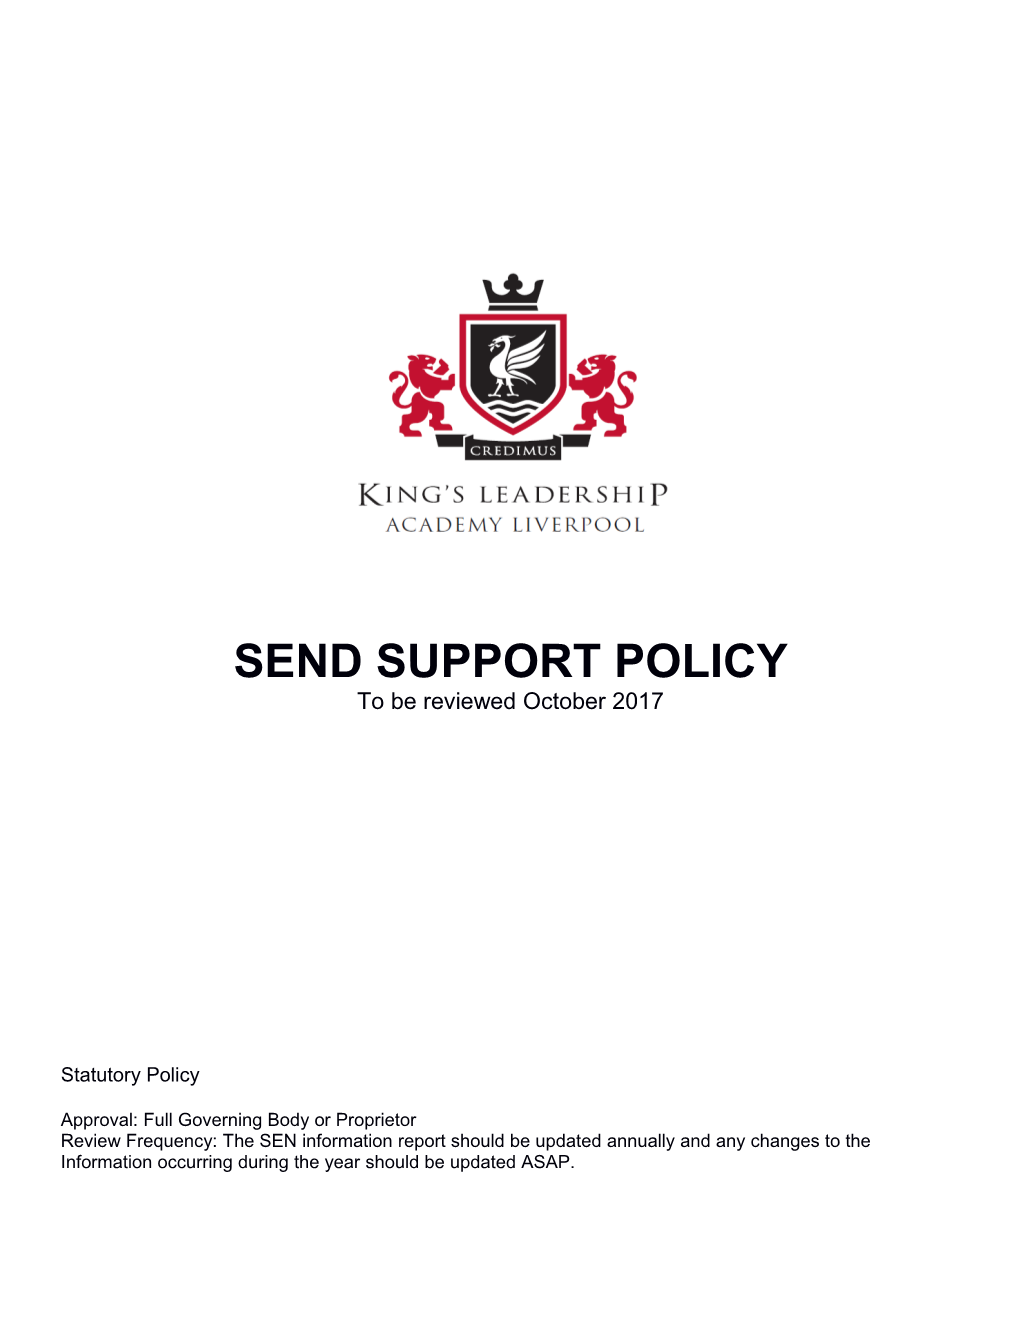 Send Support Policy